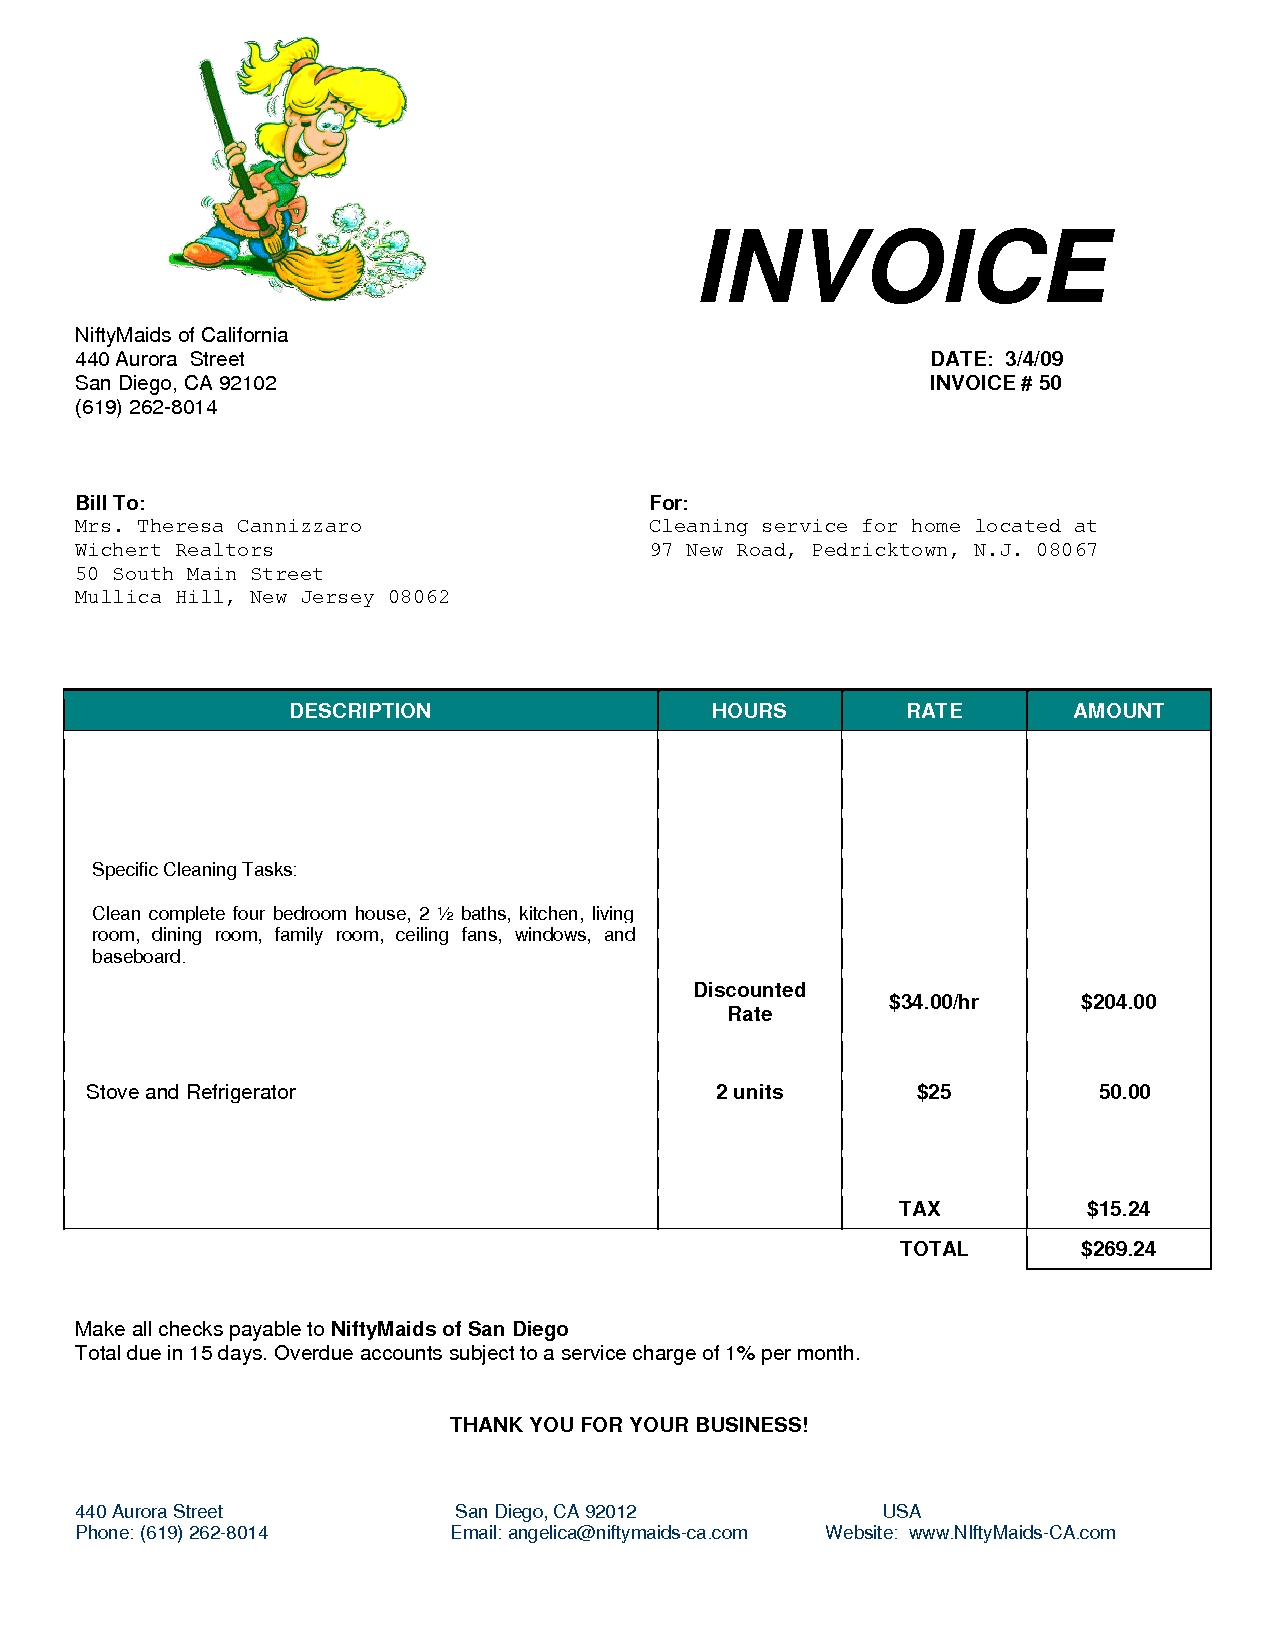 bhouseb bcleaningb bhouseb invoice house cleaning invoice sample